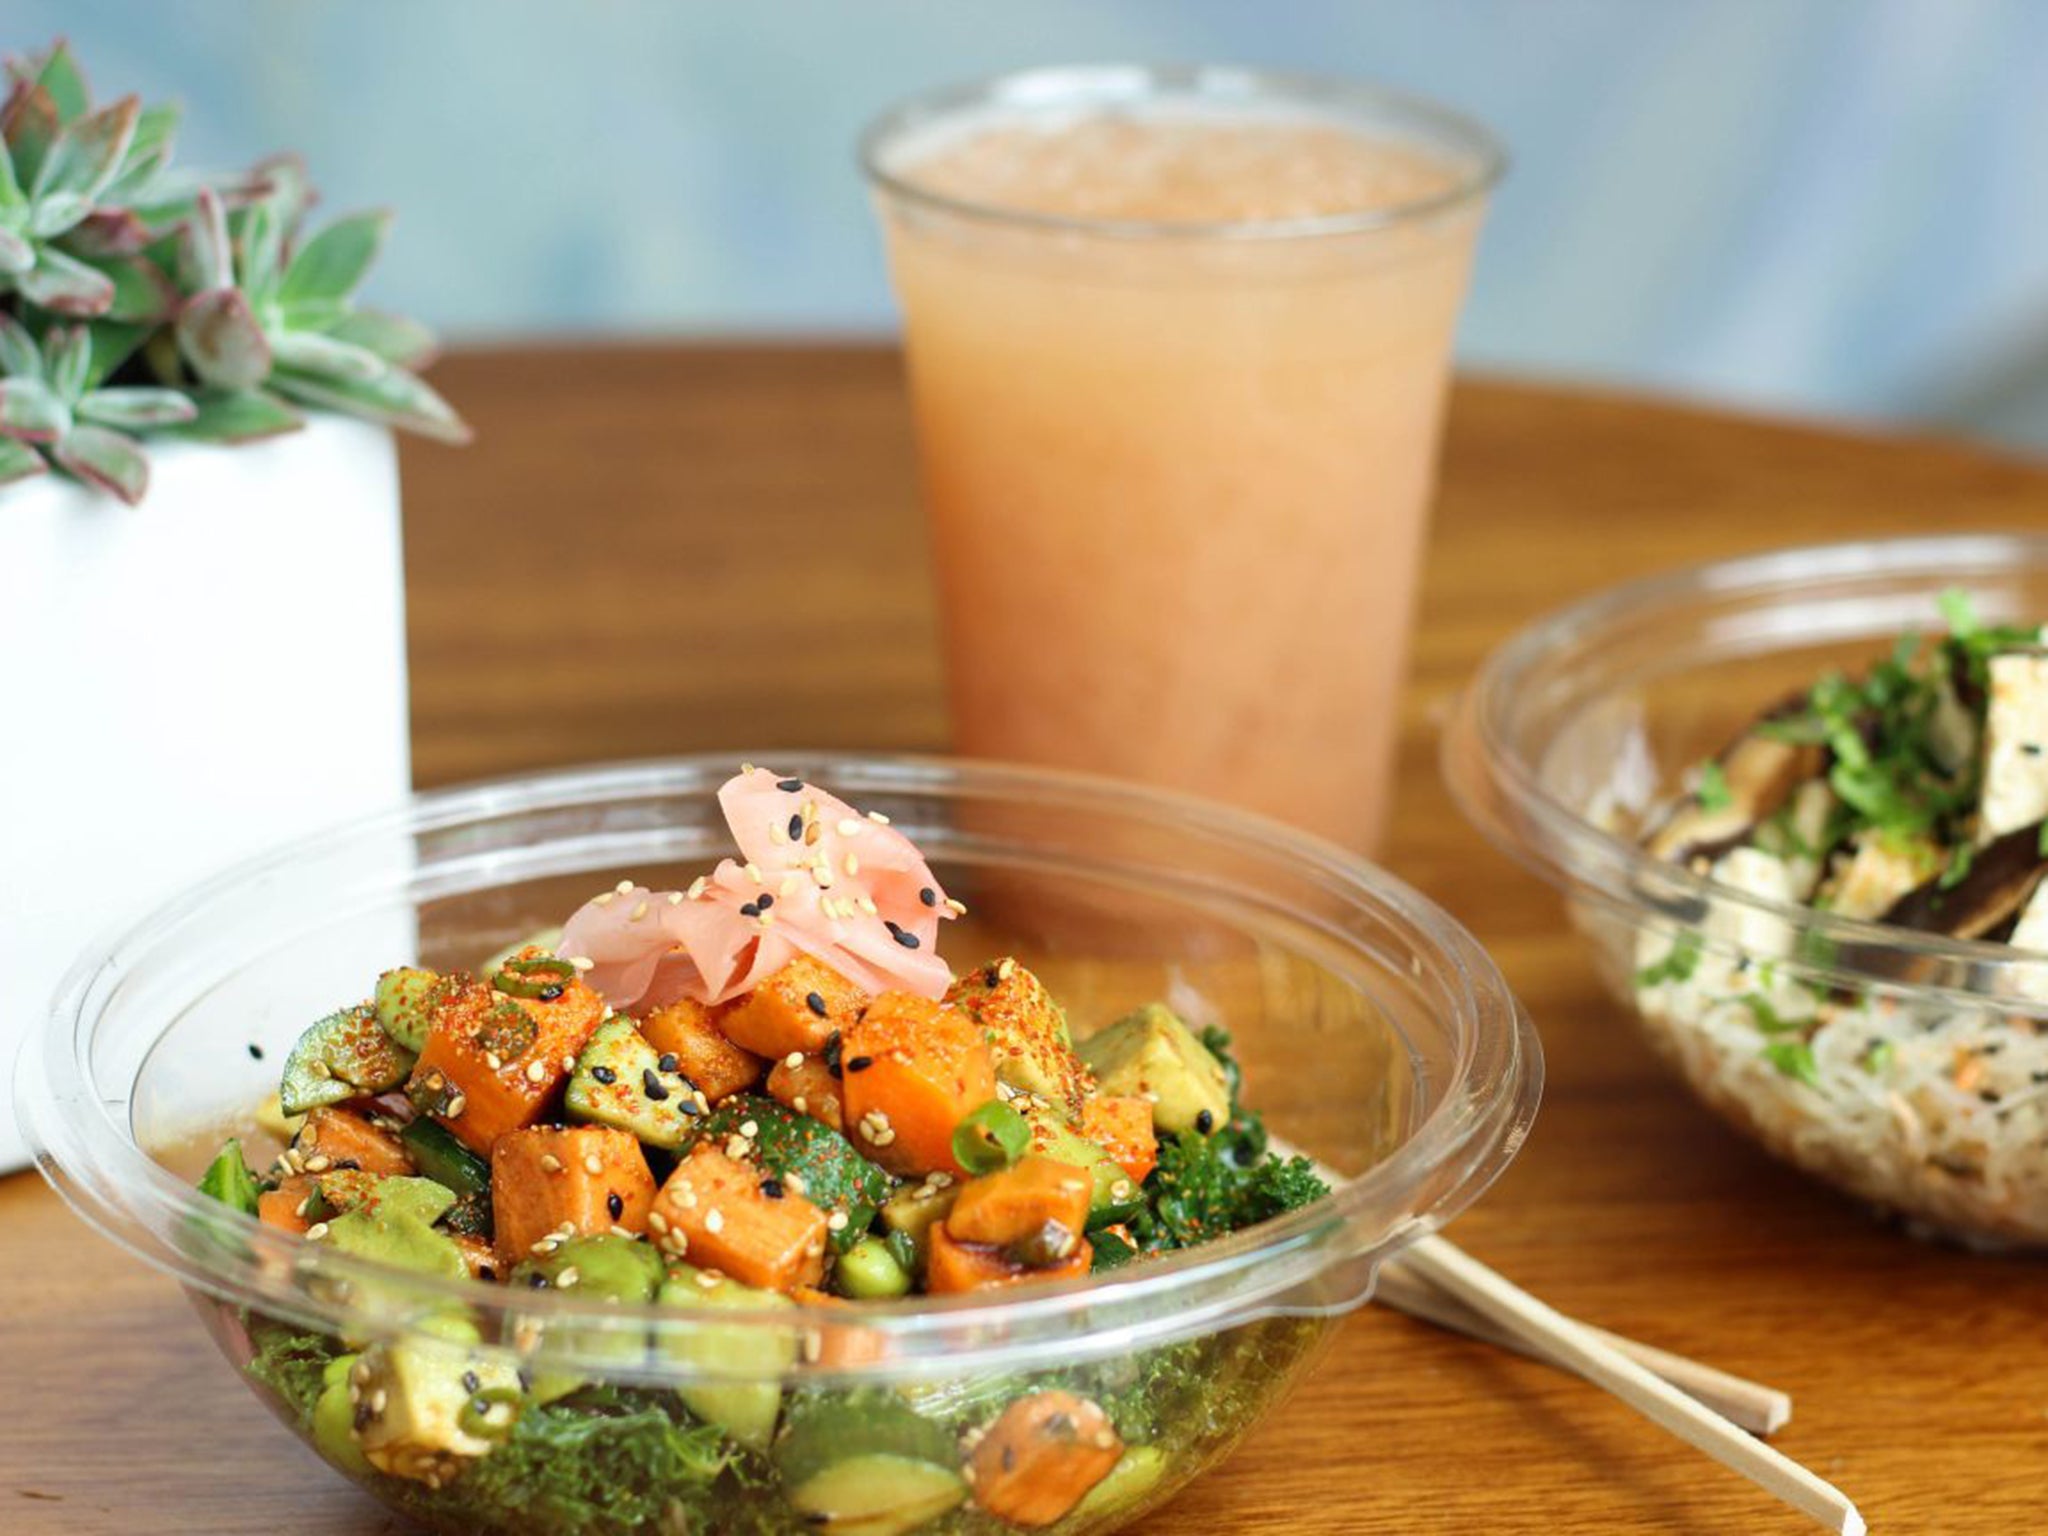 A sashimi bowl from Sweetfin Poke, a cafe in Santa Monica